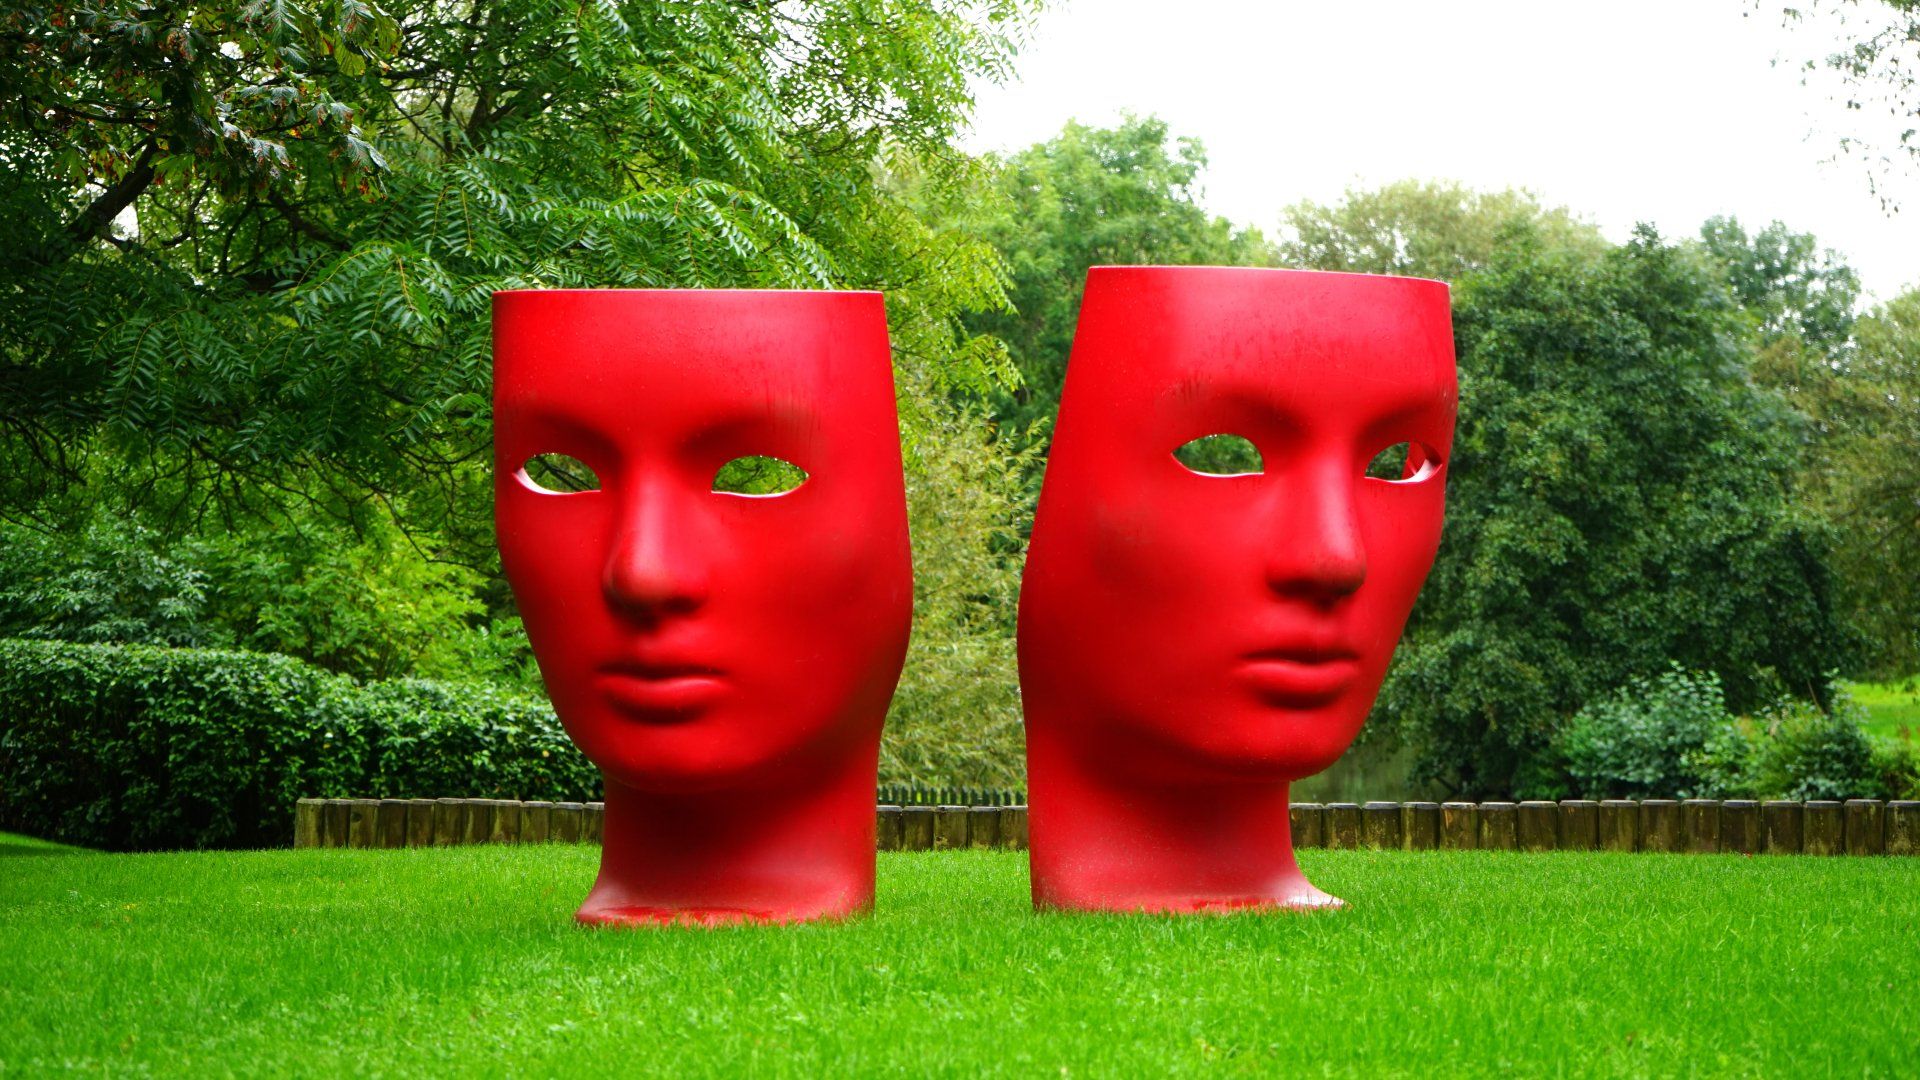 Two red sculptures depicting comedy and drama masks in a field of grass